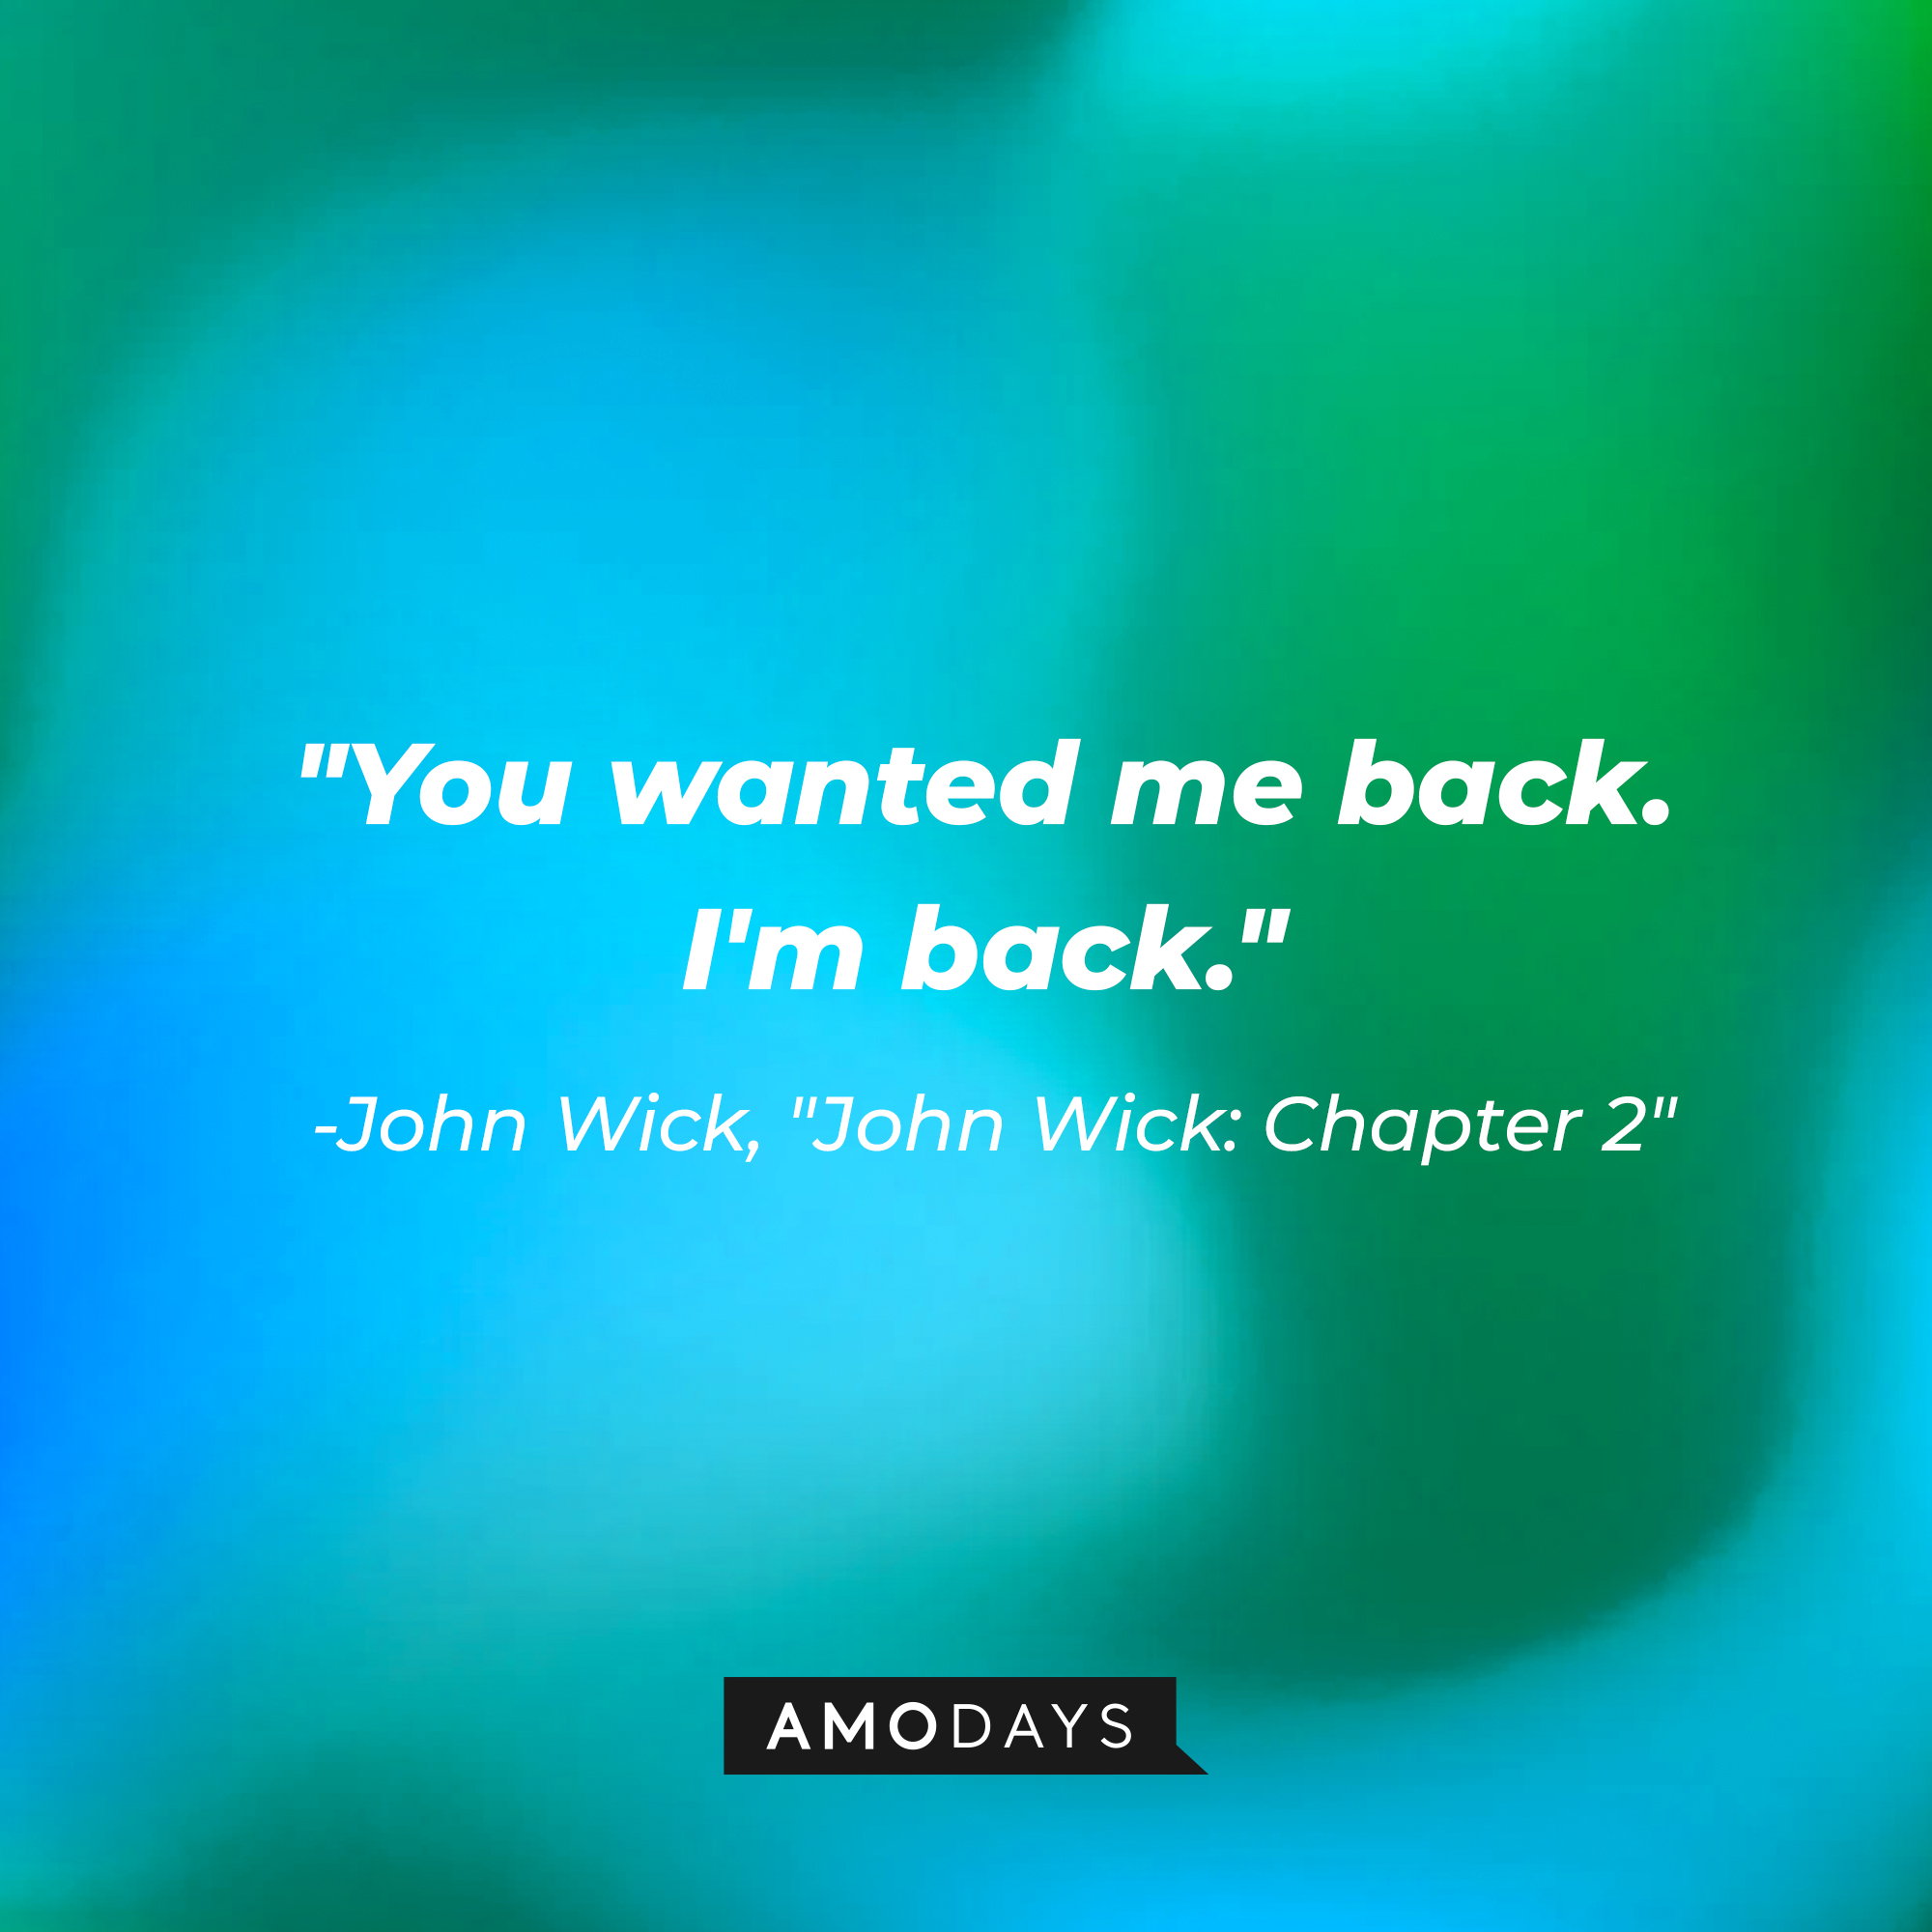 John Wick's quote: "You wanted me back. I'm back." | Source: AmoDays